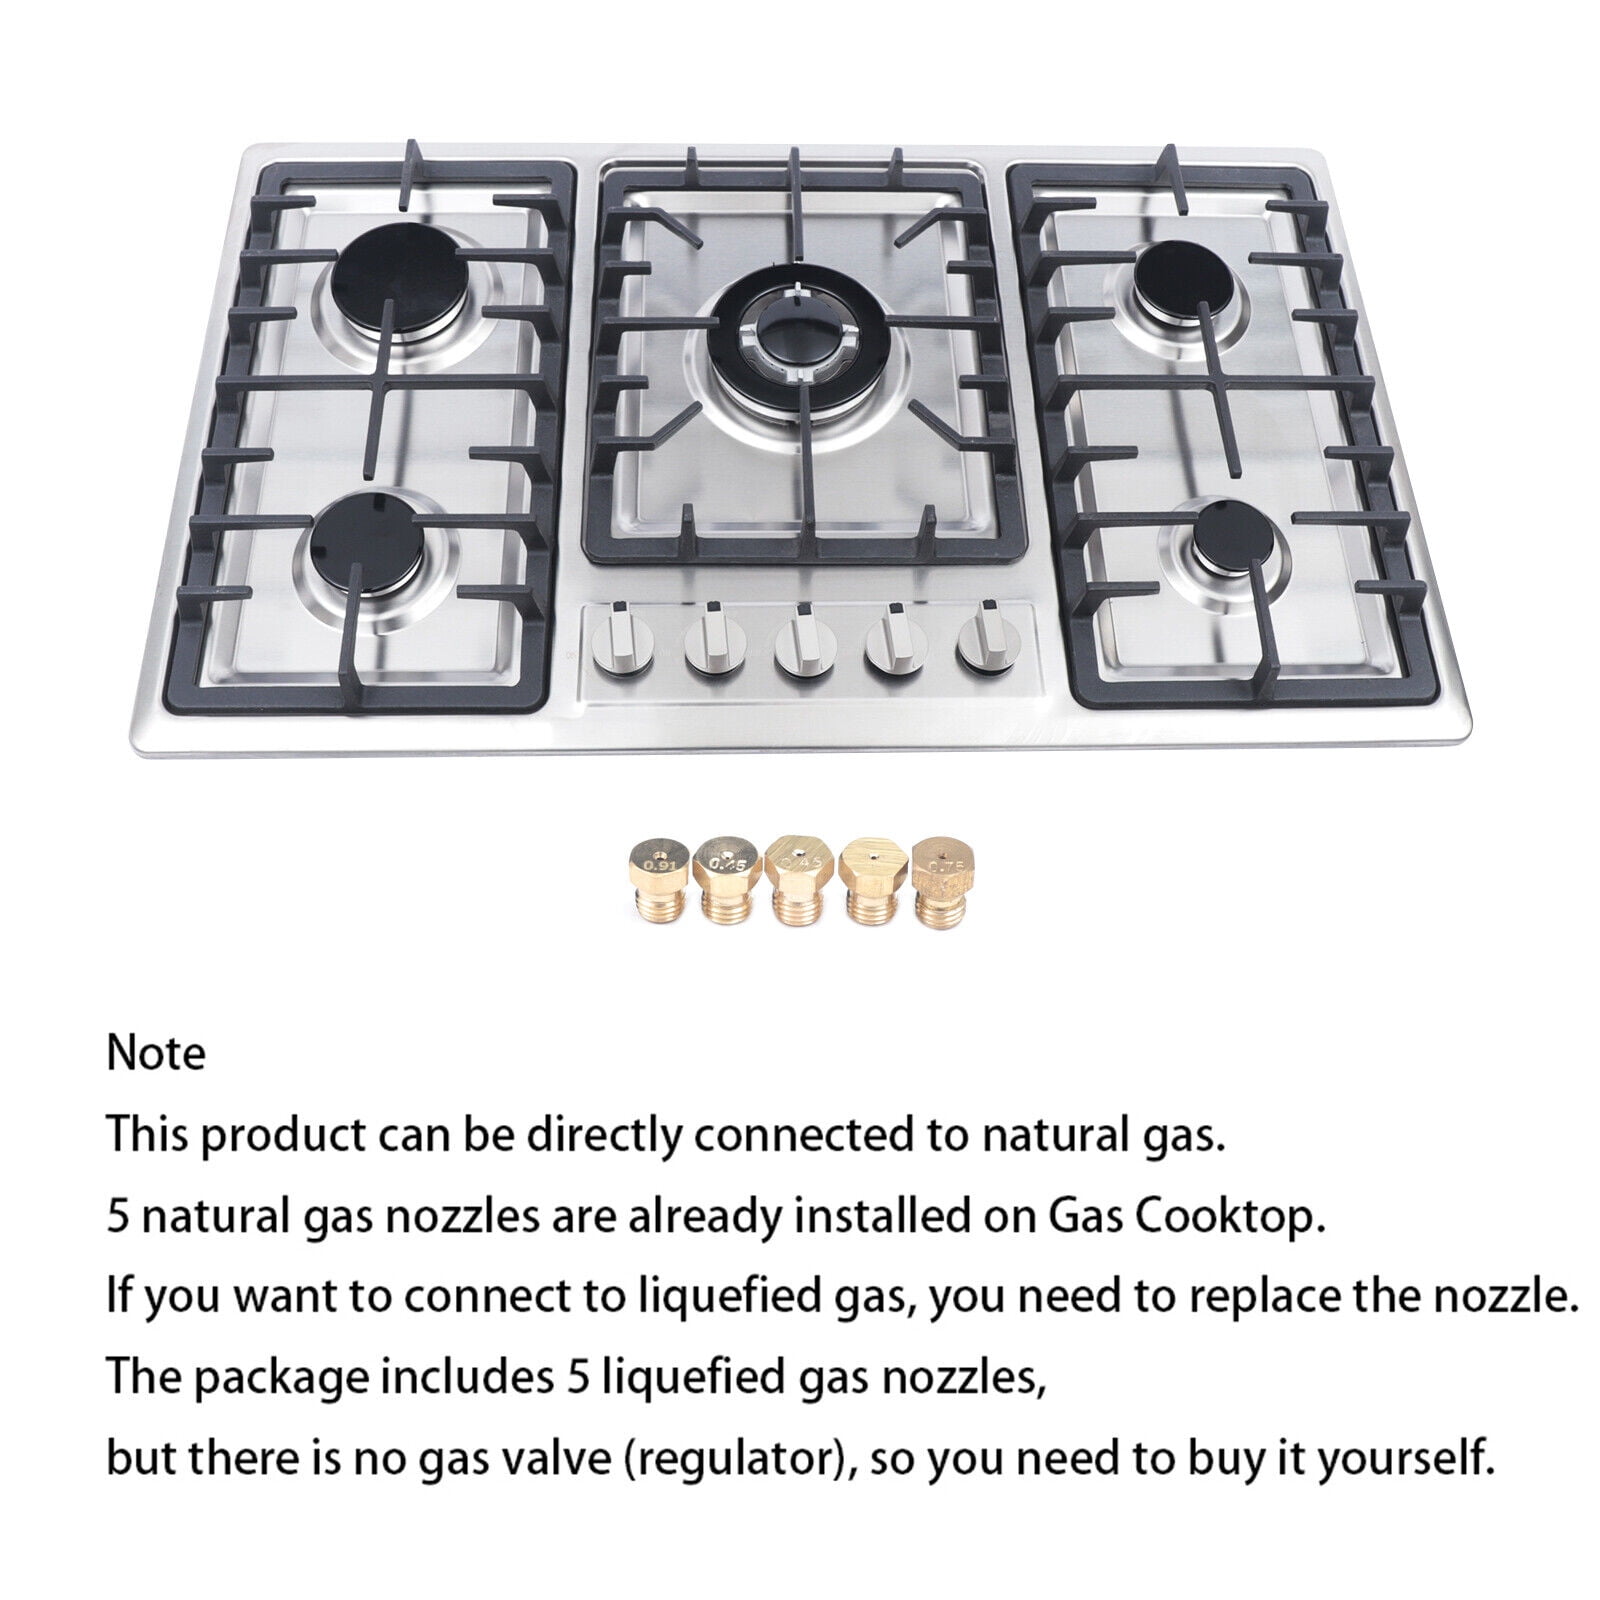 WUZSTAR 5 Burners Built-in Gas Cooktop,Stainless Steel Gas Hob Stove  Automatic Pulse Ignition Countertop Stove